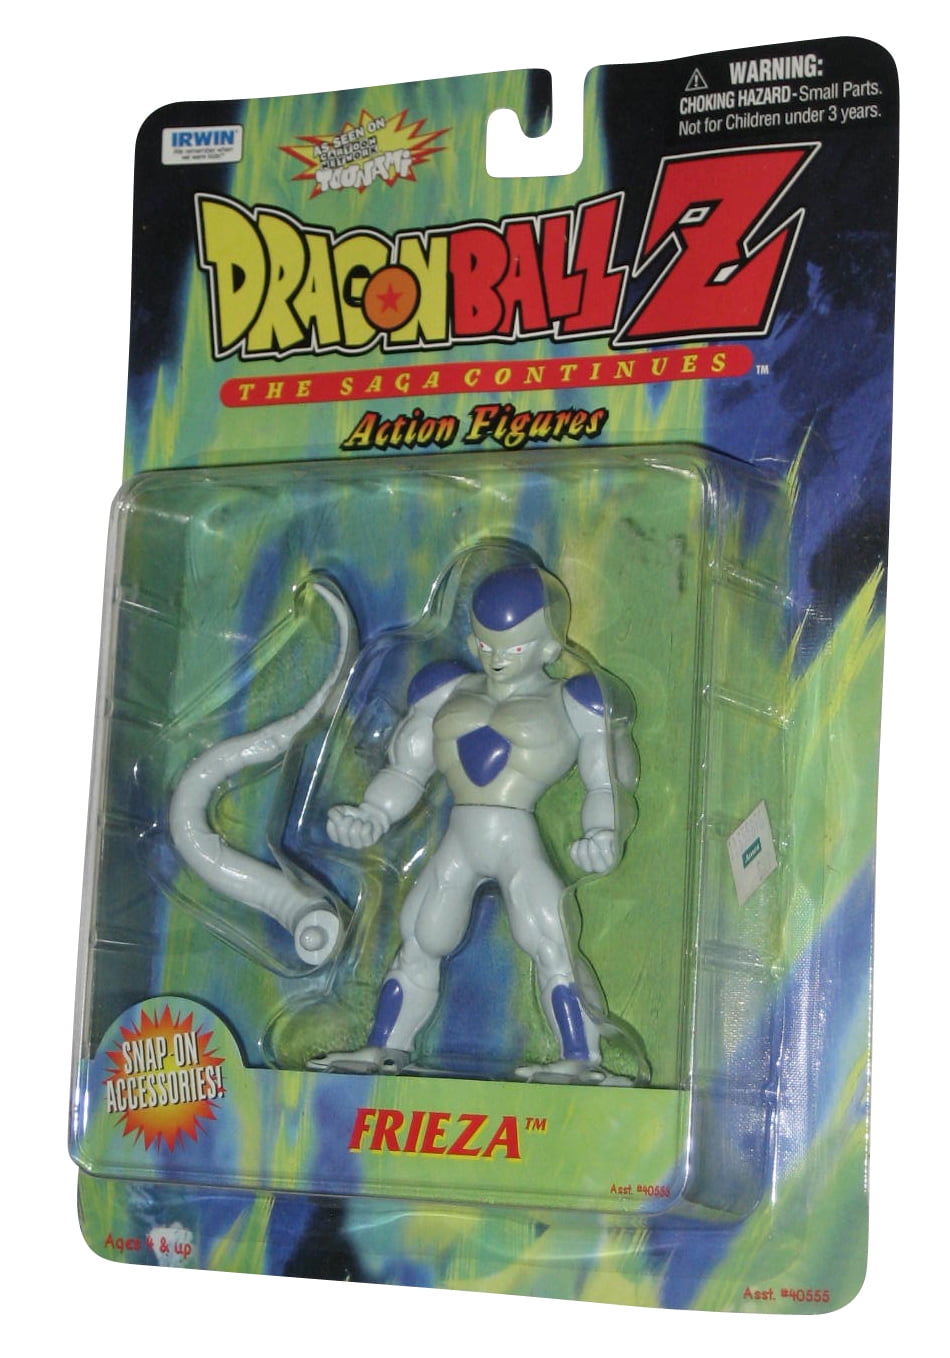 Cell Action Figure Dragonball Z The Saga Continues Series 3 IRWIN 1999 for sale online 